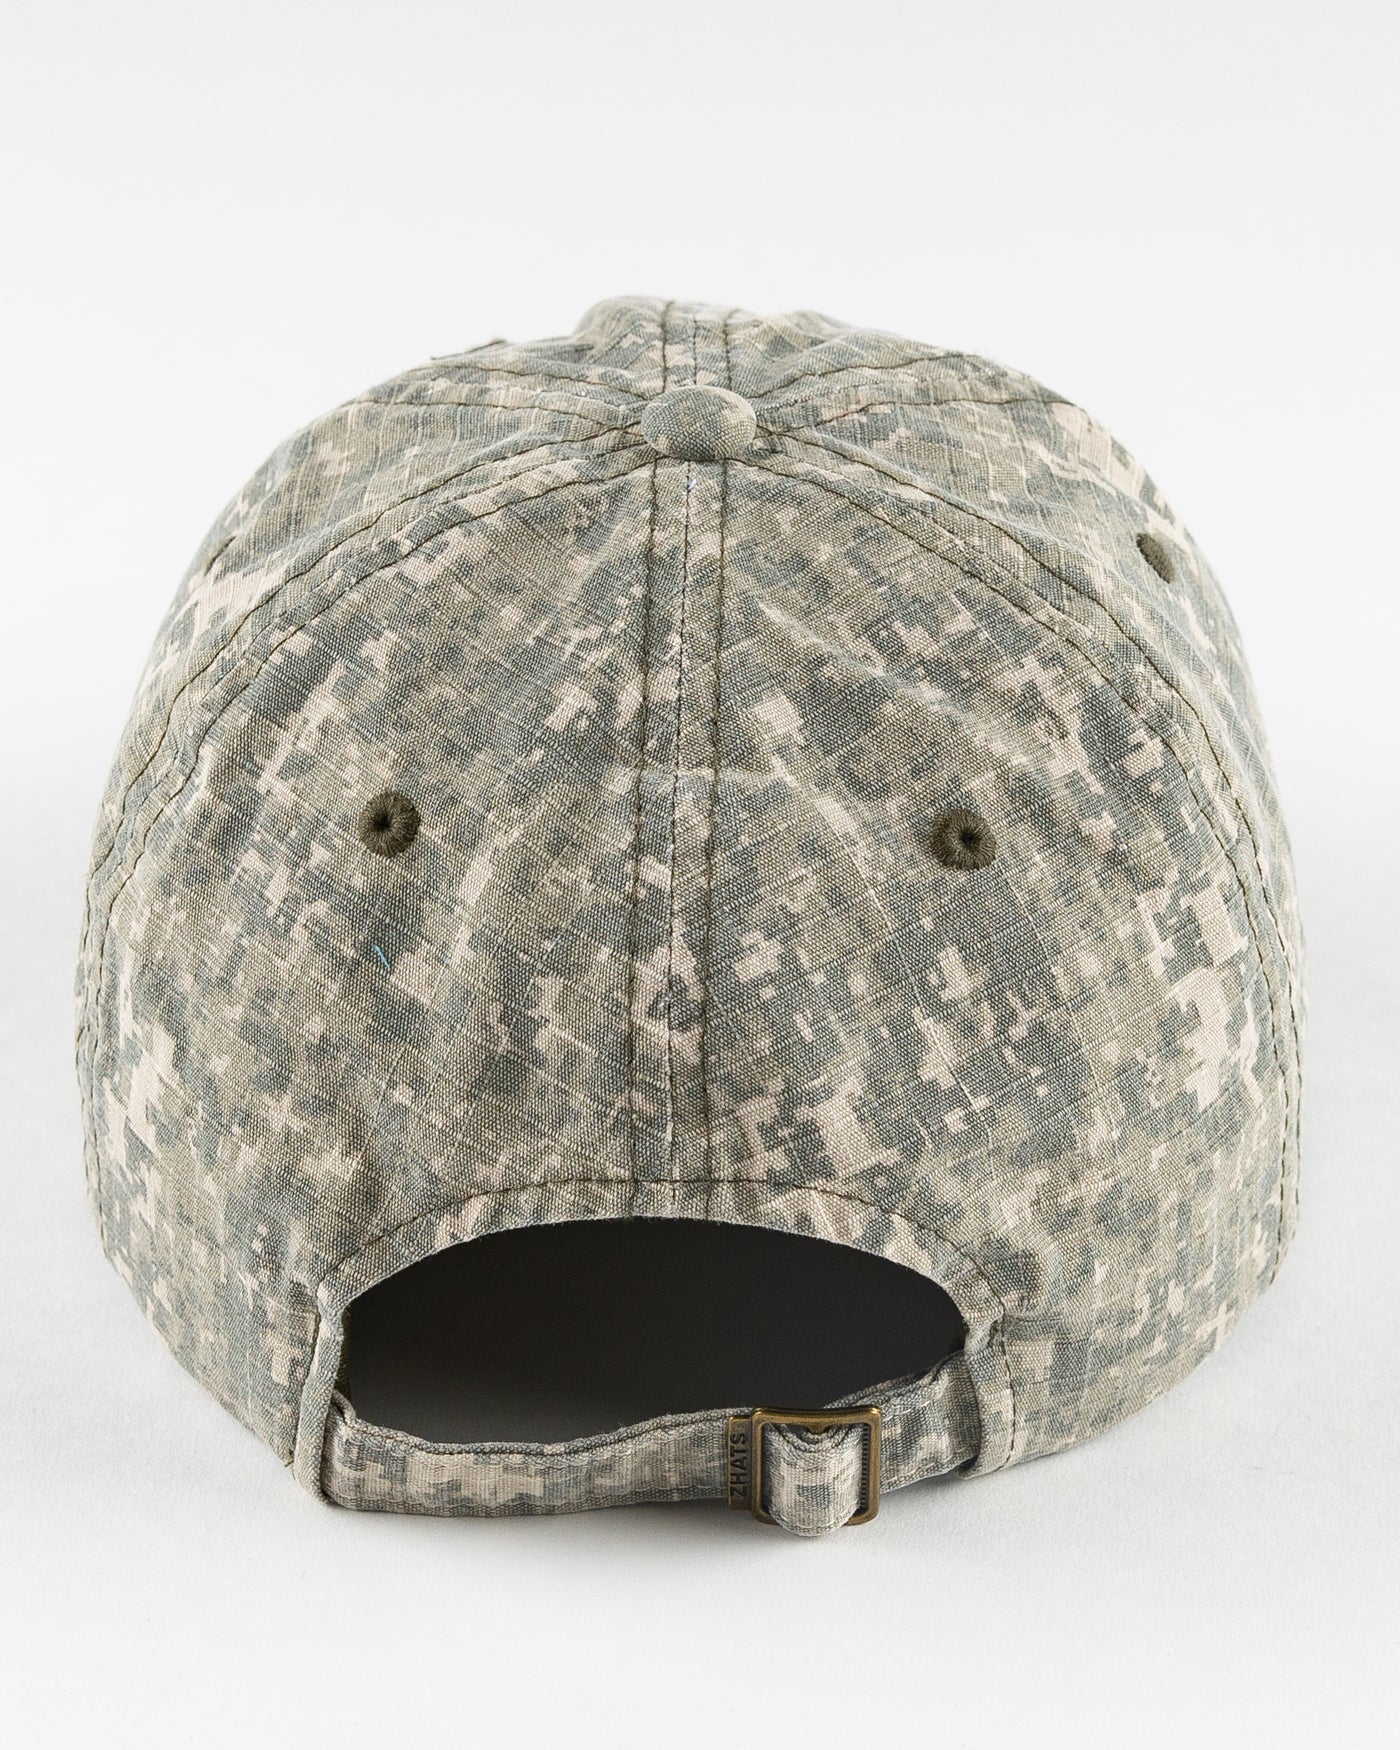 camo Rockford IceHogs adjustable cap with patch embroidered on front - back lay flat